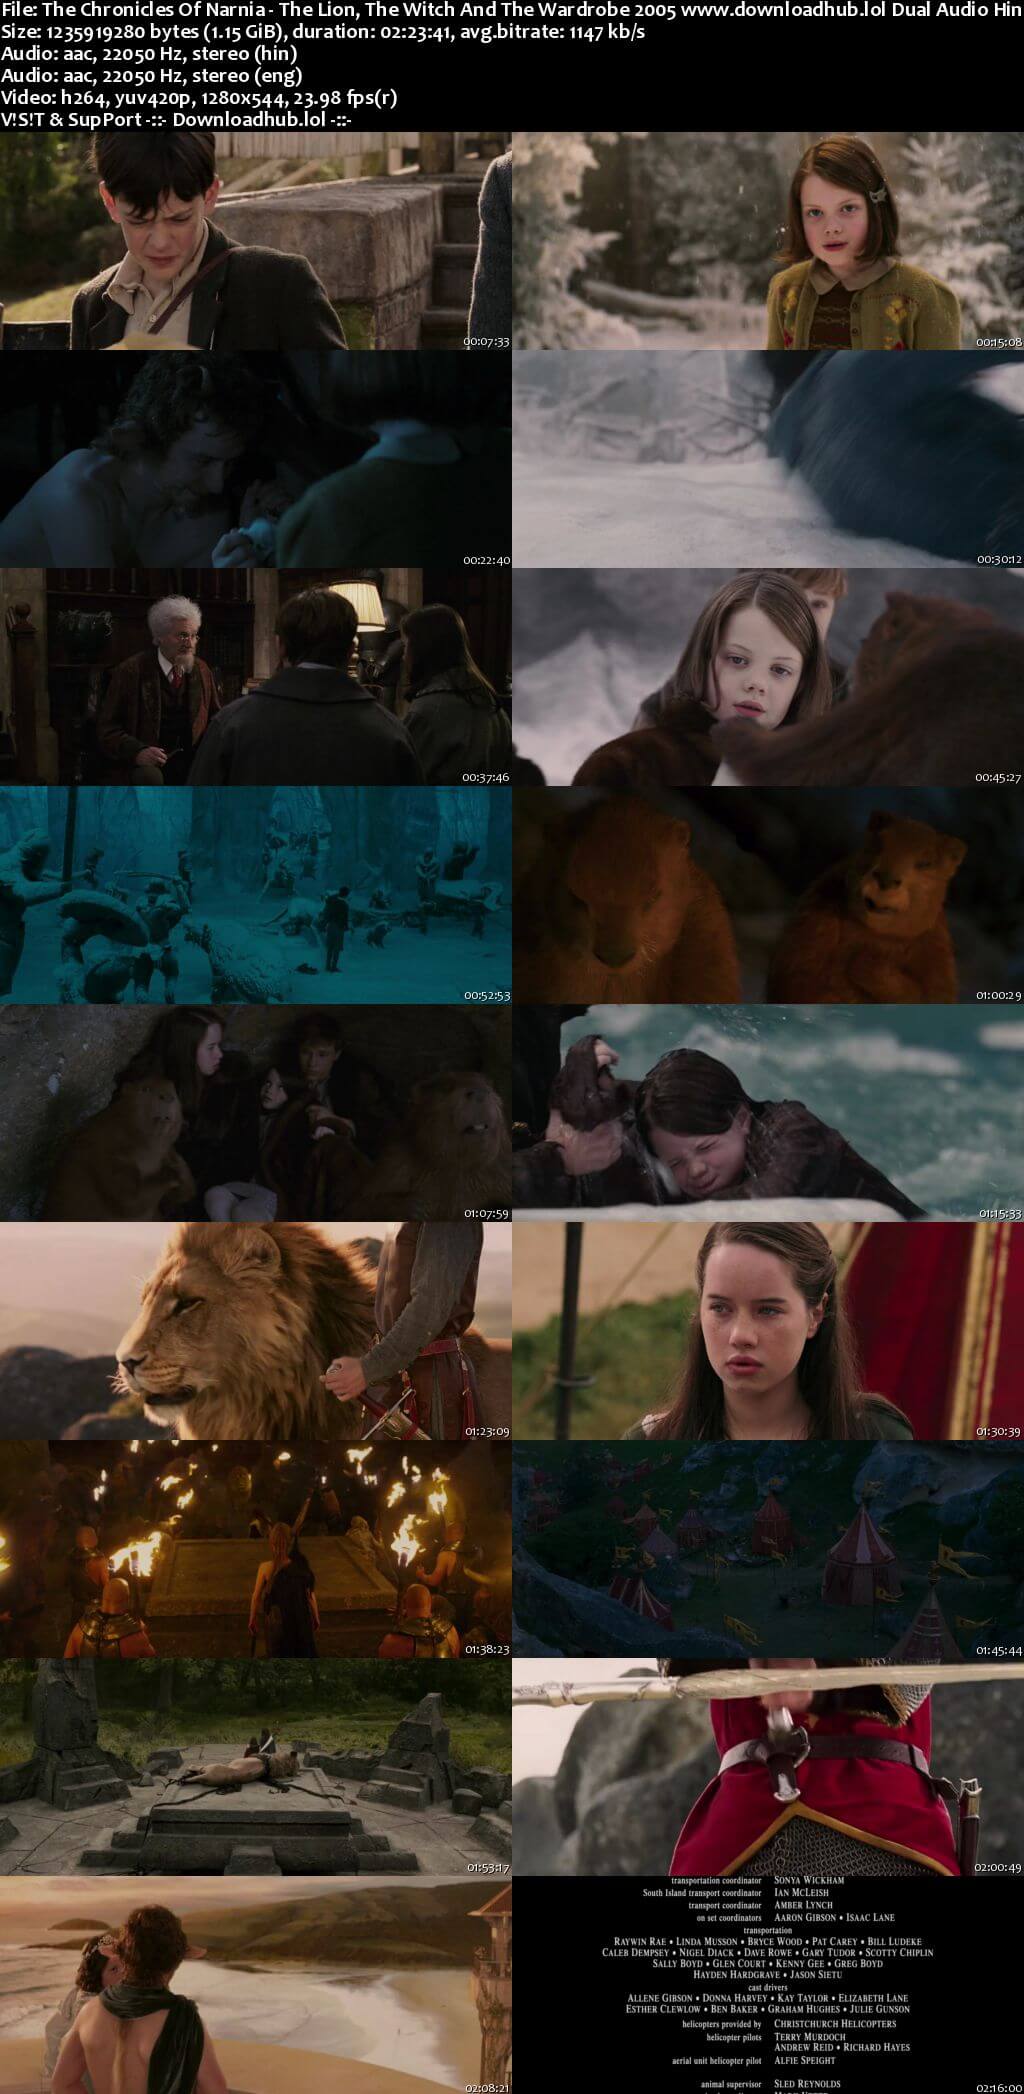 The Chronicles of Narnia The Lion the Witch and the Wardrobe 2005 Hindi Dual Audio 720p BluRay ESubs